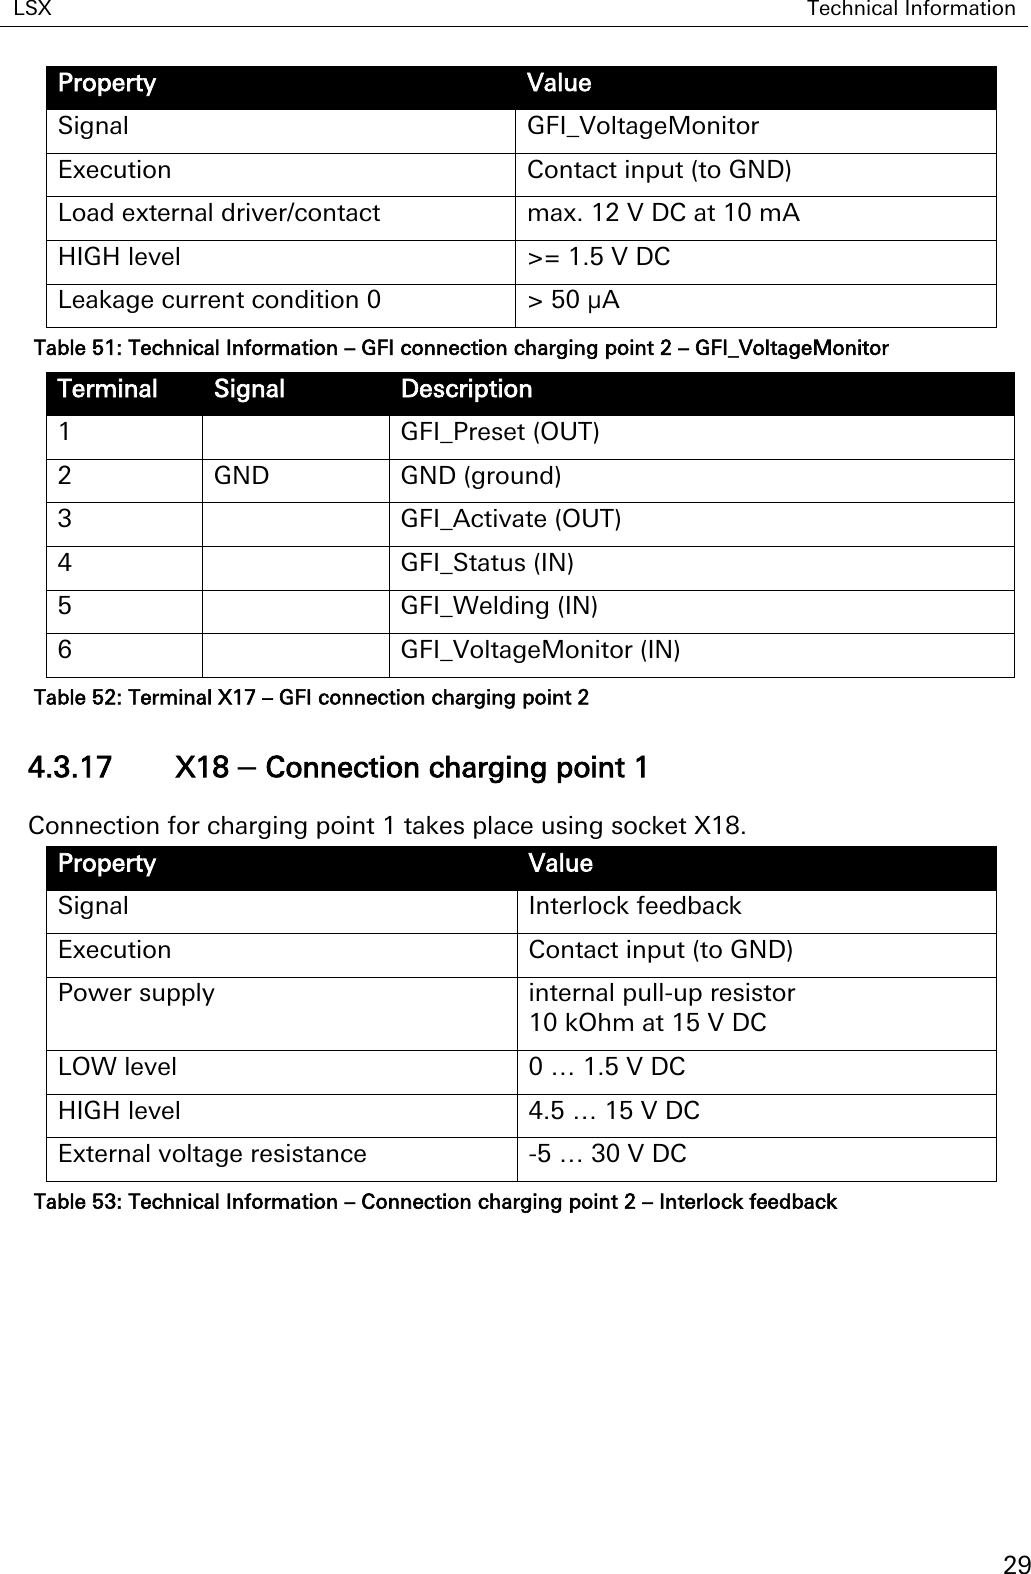 LSX Technical Information   29 Property Value Signal GFI_VoltageMonitor Execution Contact input (to GND) Load external driver/contact max. 12 V DC at 10 mA HIGH level &gt;= 1.5 V DC Leakage current condition 0 &gt; 50 µA Table 51: Technical Information – GFI connection charging point 2 – GFI_VoltageMonitor Terminal Signal Description 1  GFI_Preset (OUT) 2 GND GND (ground) 3  GFI_Activate (OUT) 4  GFI_Status (IN) 5  GFI_Welding (IN) 6  GFI_VoltageMonitor (IN) Table 52: Terminal X17 – GFI connection charging point 2 4.3.17 X18 – Connection charging point 1 Connection for charging point 1 takes place using socket X18. Property Value Signal Interlock feedback Execution Contact input (to GND) Power supply internal pull-up resistor  10 kOhm at 15 V DC LOW level 0 … 1.5 V DC HIGH level 4.5 … 15 V DC External voltage resistance -5 … 30 V DC Table 53: Technical Information – Connection charging point 2 – Interlock feedback 